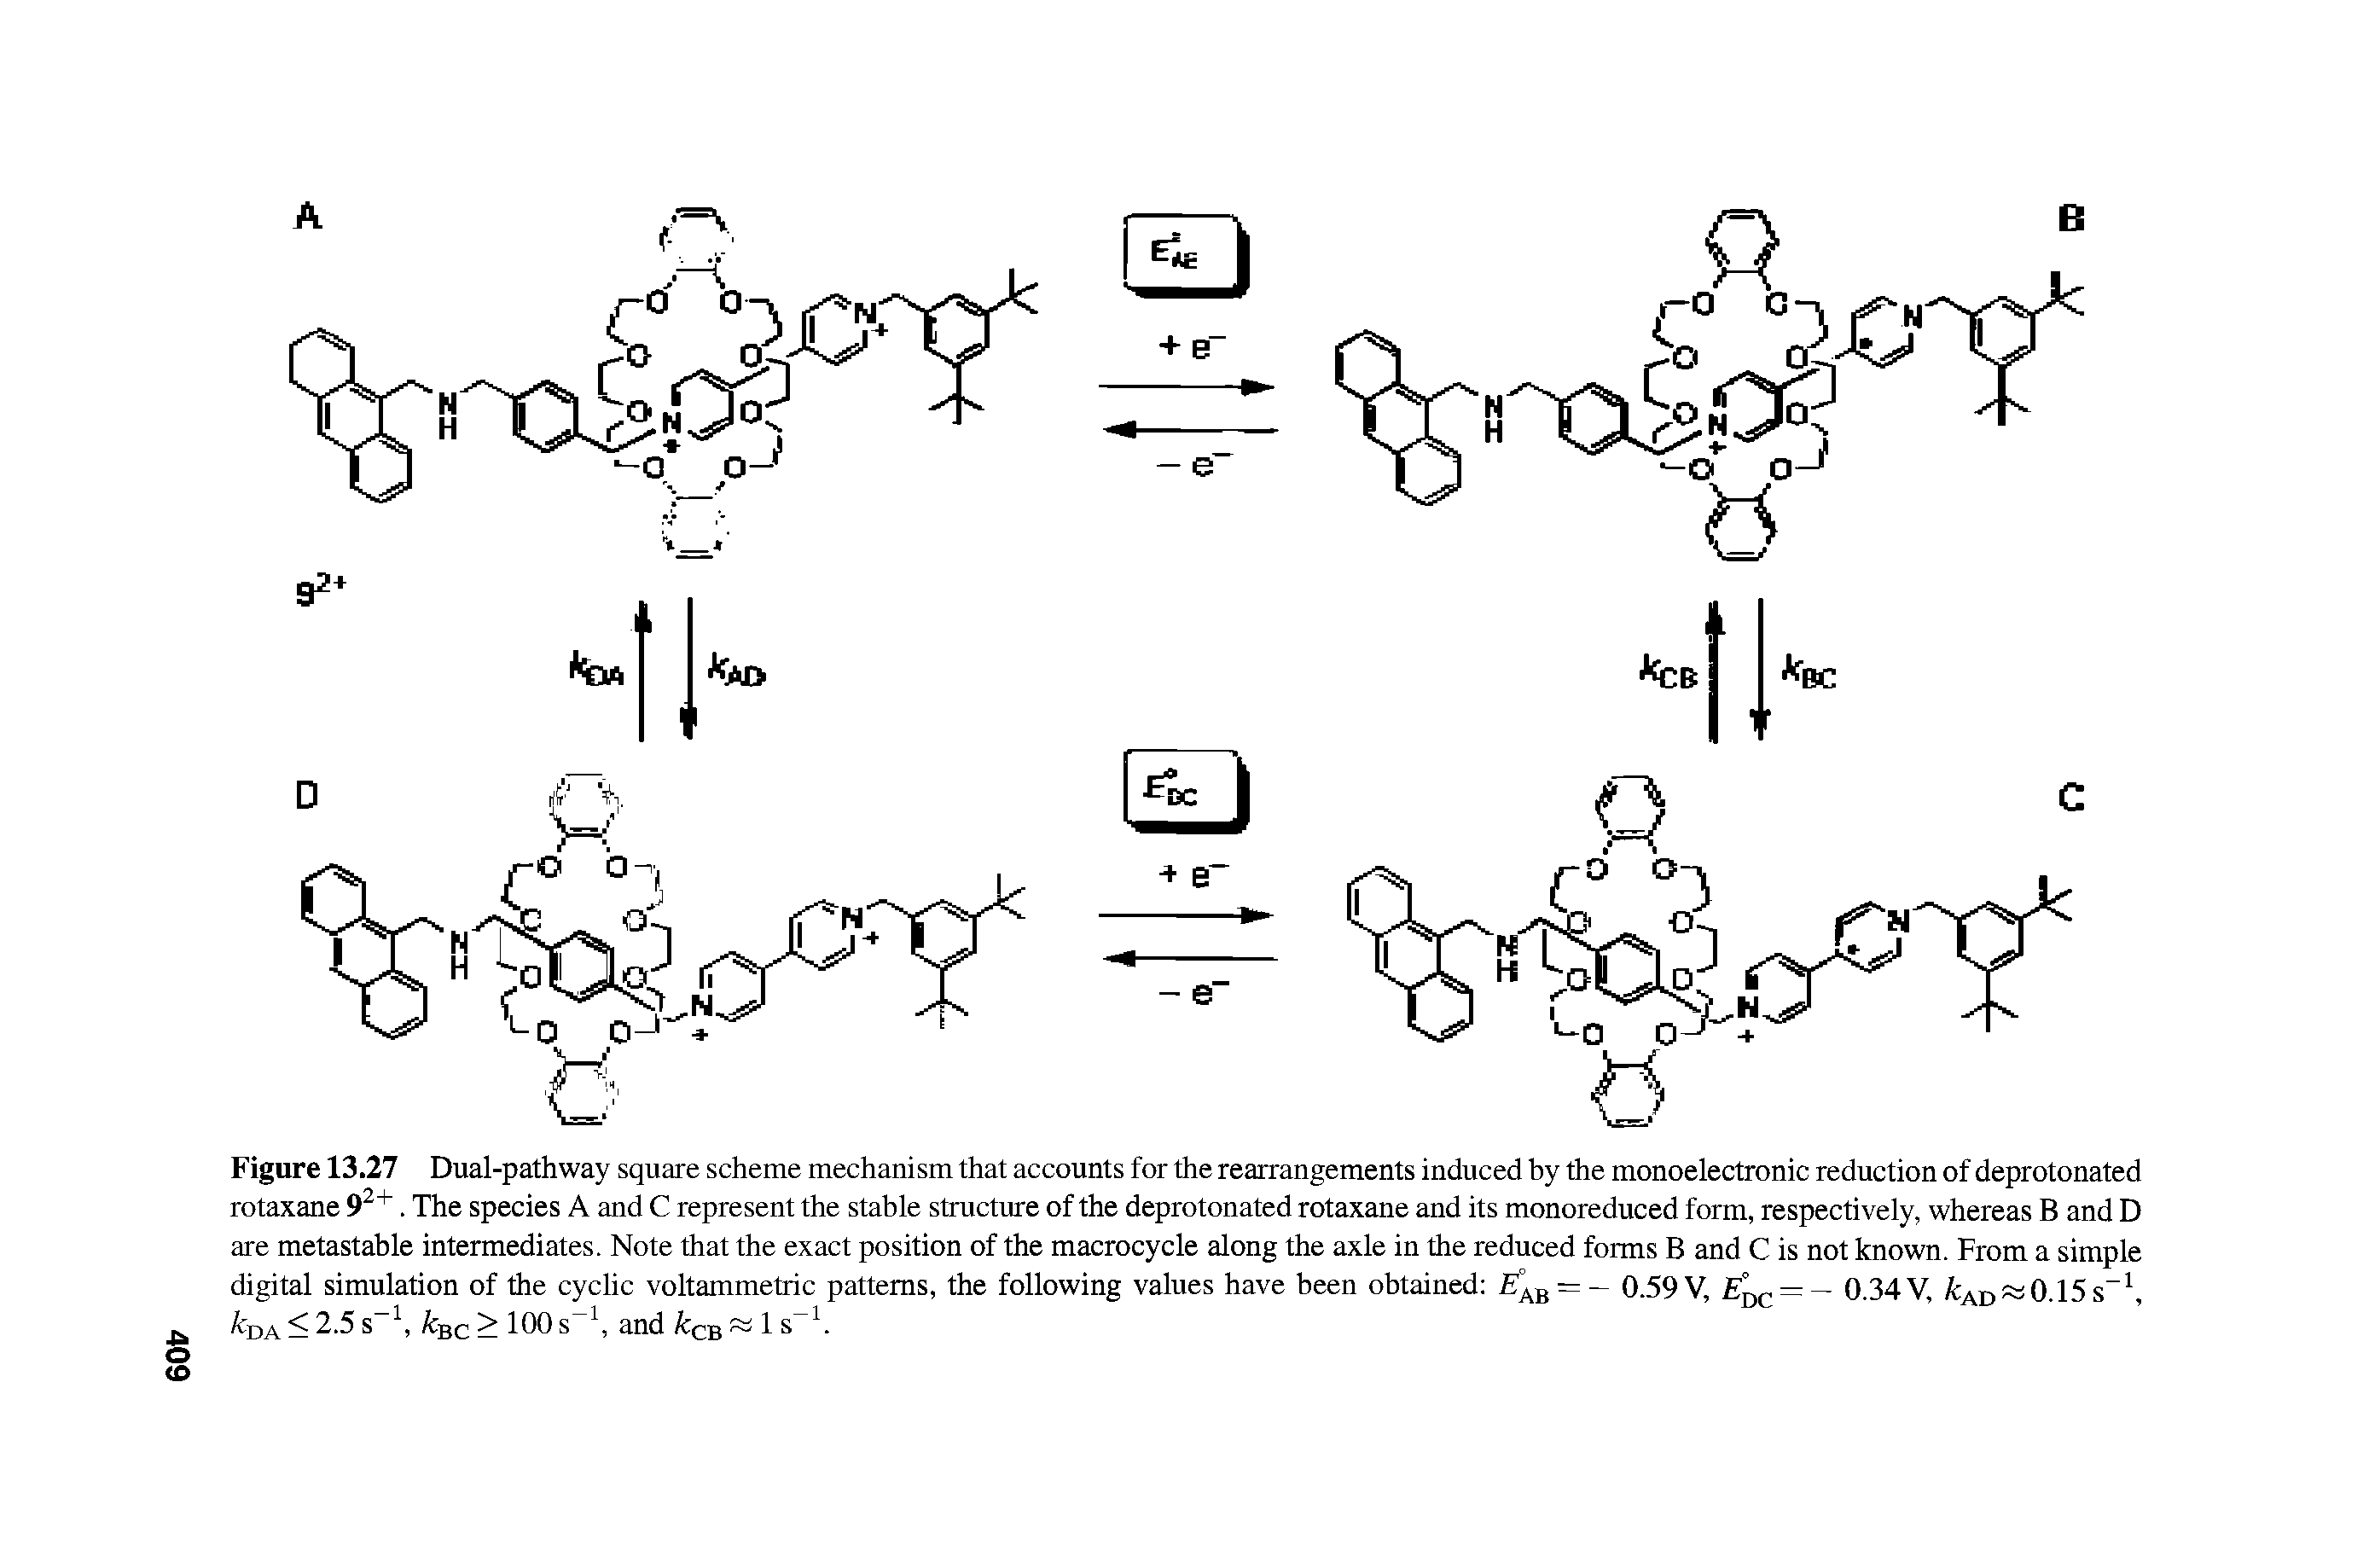 Figure 13.27 Dual-pathway square scheme mechanism that accounts for the rearrangements induced by the monoelectronic reduction of deprotonated rotaxane 92+. The species A and C represent the stable structure of the deprotonated rotaxane and its monoreduced form, respectively, whereas and D are metastable intermediates. Note that the exact position of the macrocycle along the axle in the reduced forms and C is not known. From a simple digital simulation of the cyclic voltammetric patterns, the following values have been obtained = - 0.59V, E°dc = - 0.34V, /cAD 0.15S- da<2.5s kBC > 100 s and kCB 1 s V...